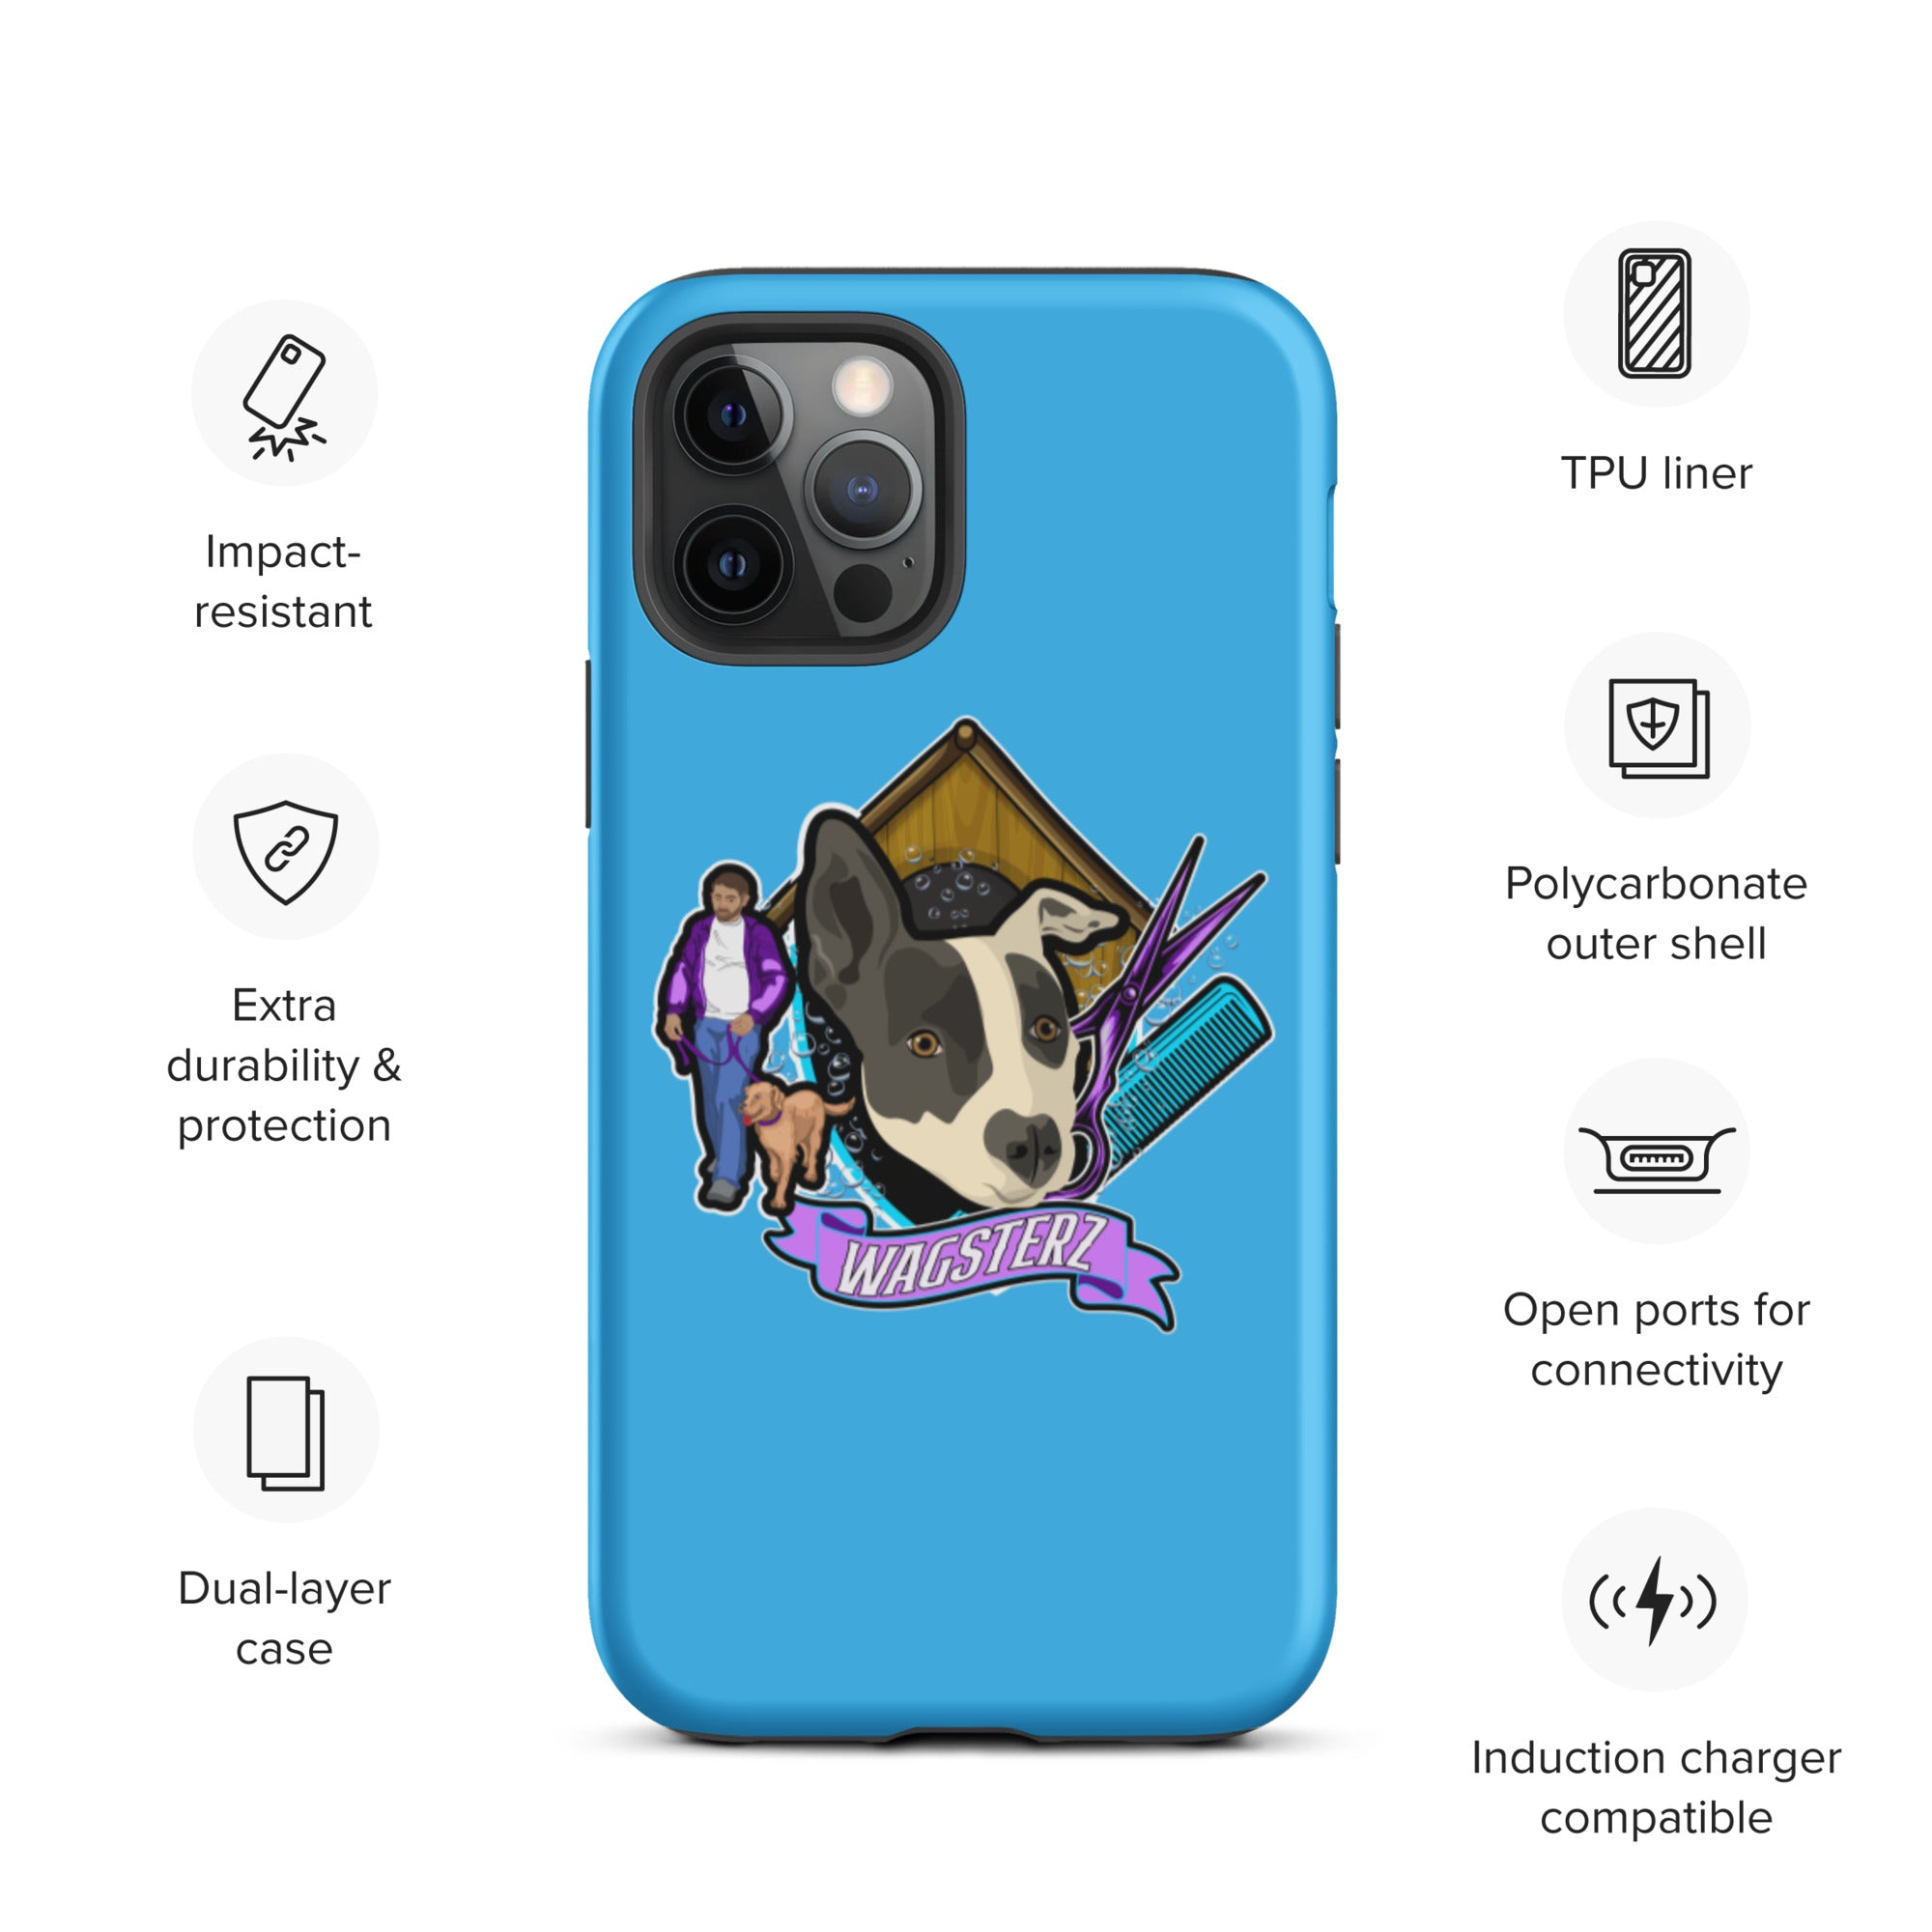 Wagsterz iPhone case